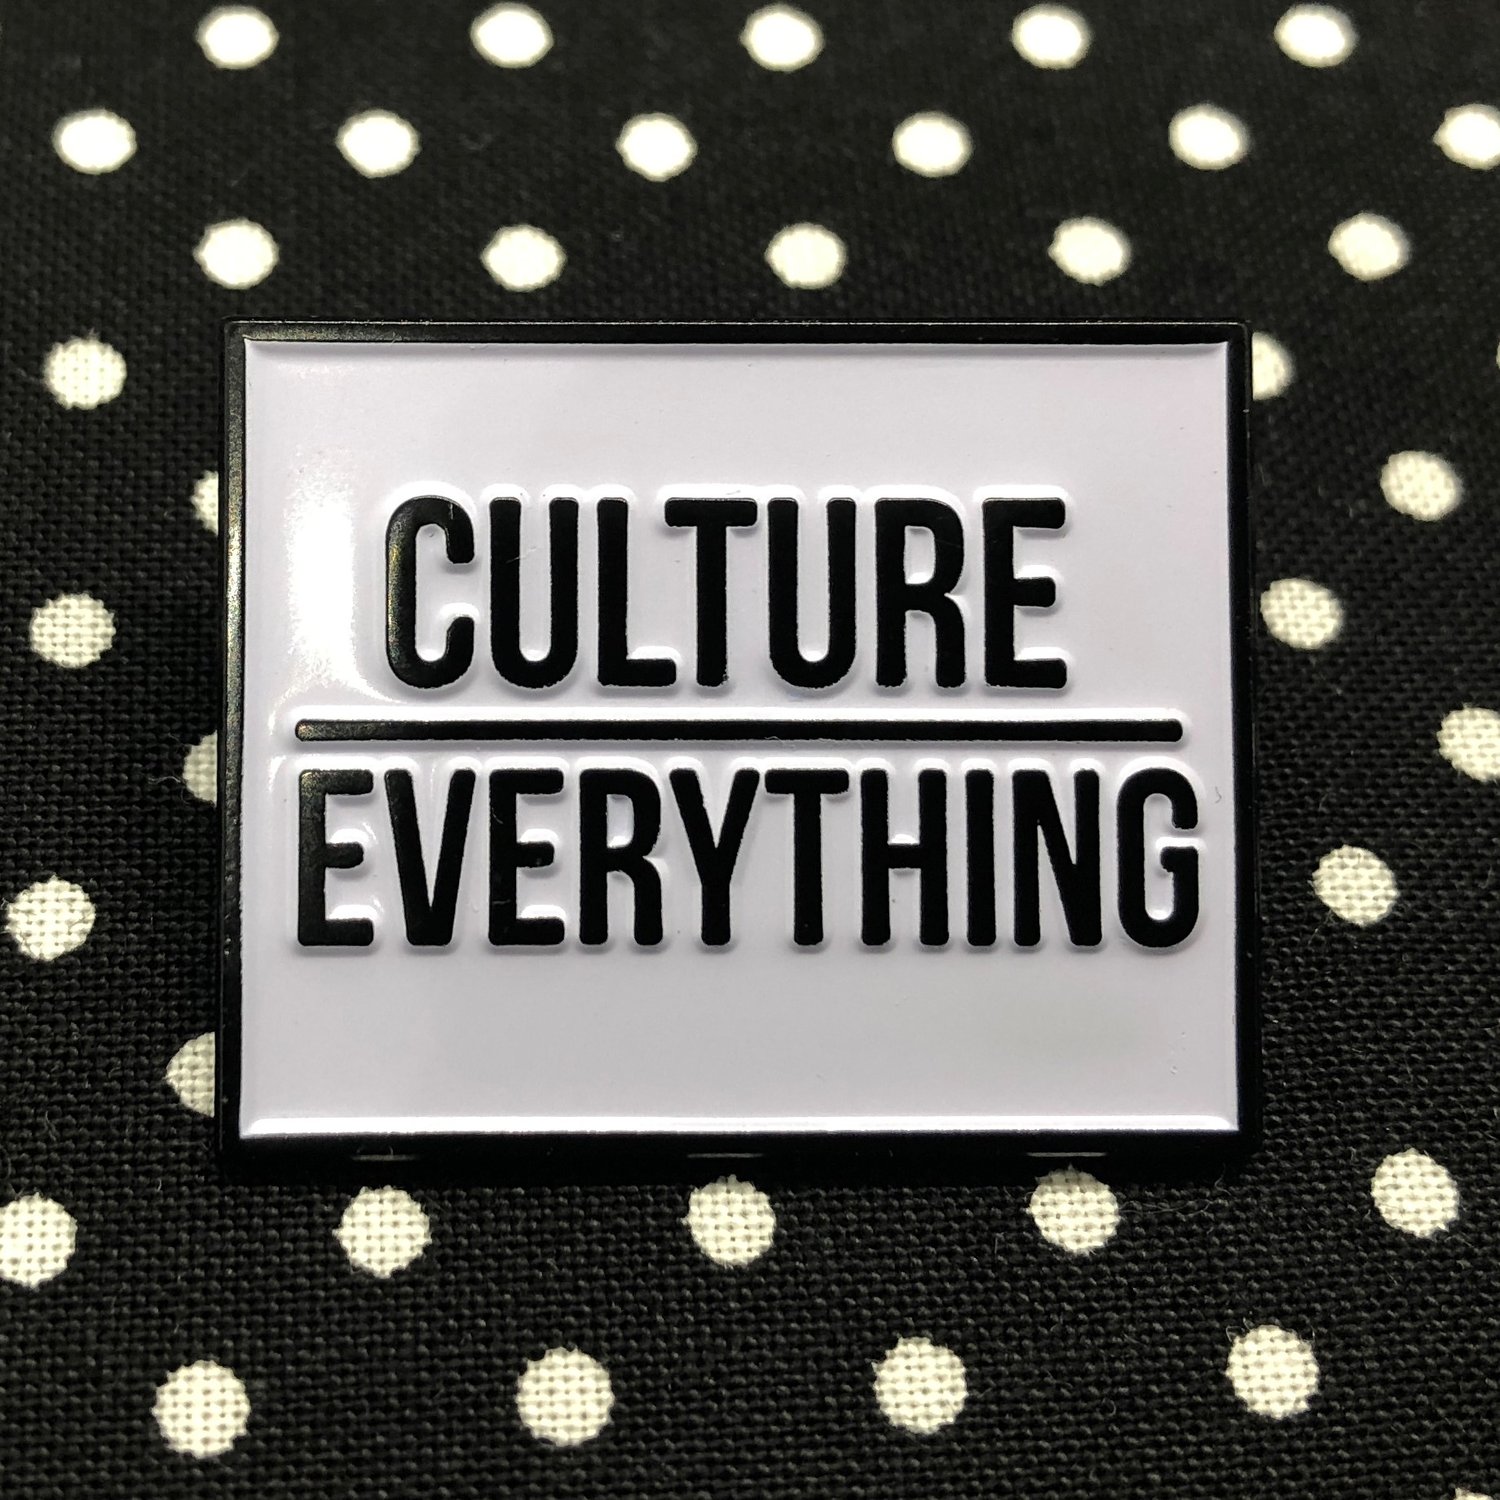 Pin on Lifestyles & Culture